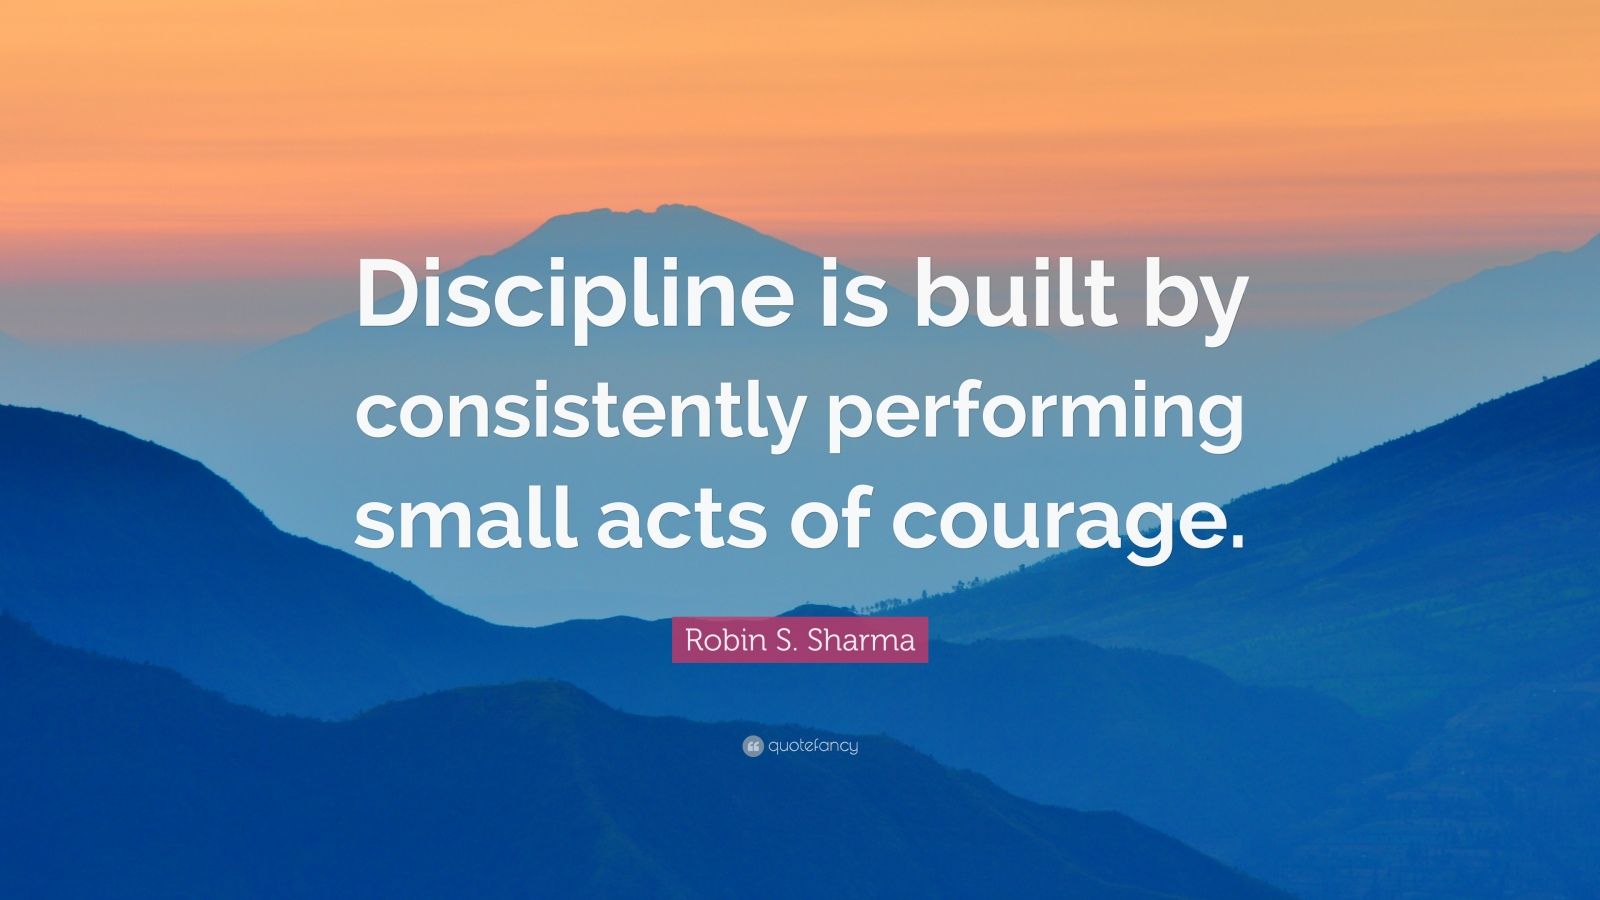 Robin S. Sharma Quote: “Discipline is built by consistently performing ...